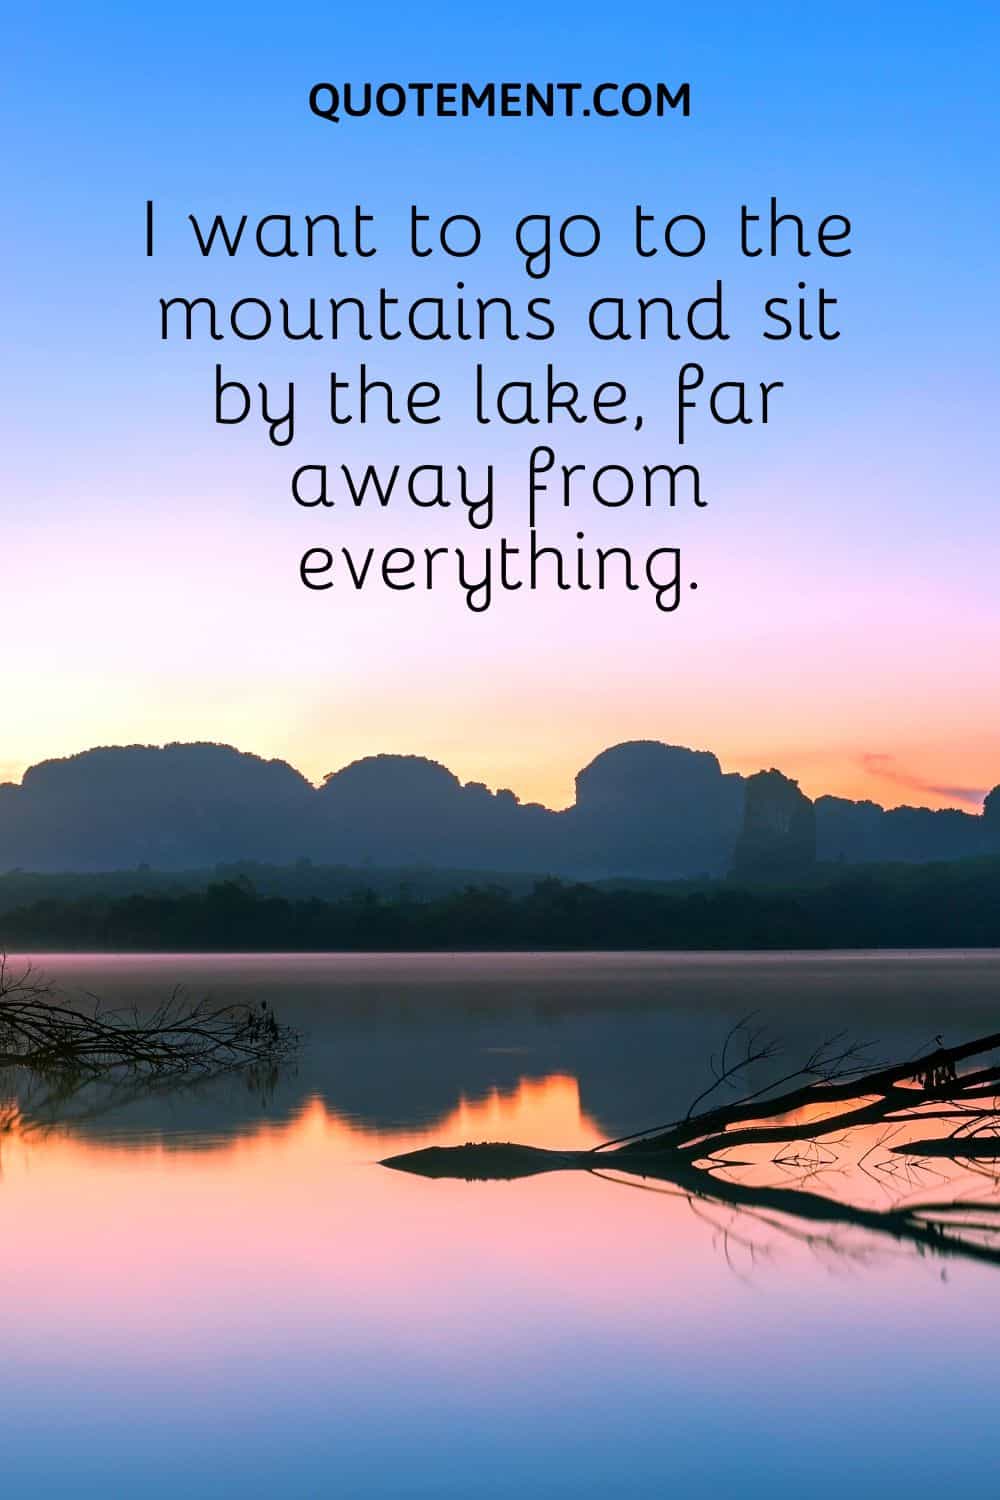 I want to go to the mountains and sit by the lake, far away from everything.